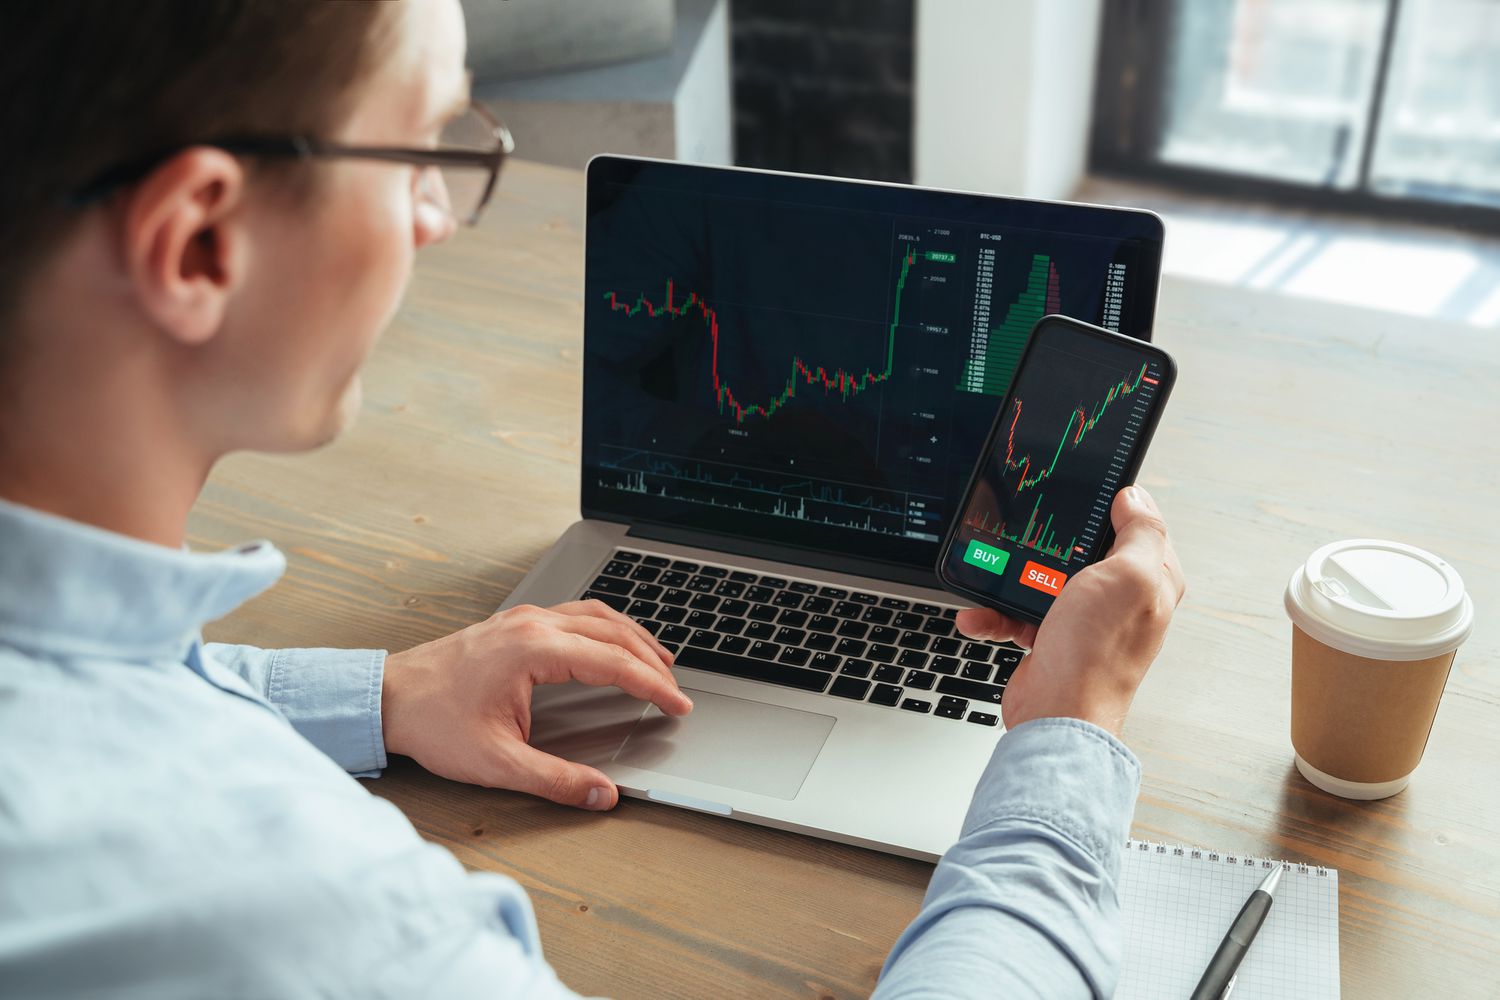 8 Best Crypto Options Trading Platforms in | CoinCodex